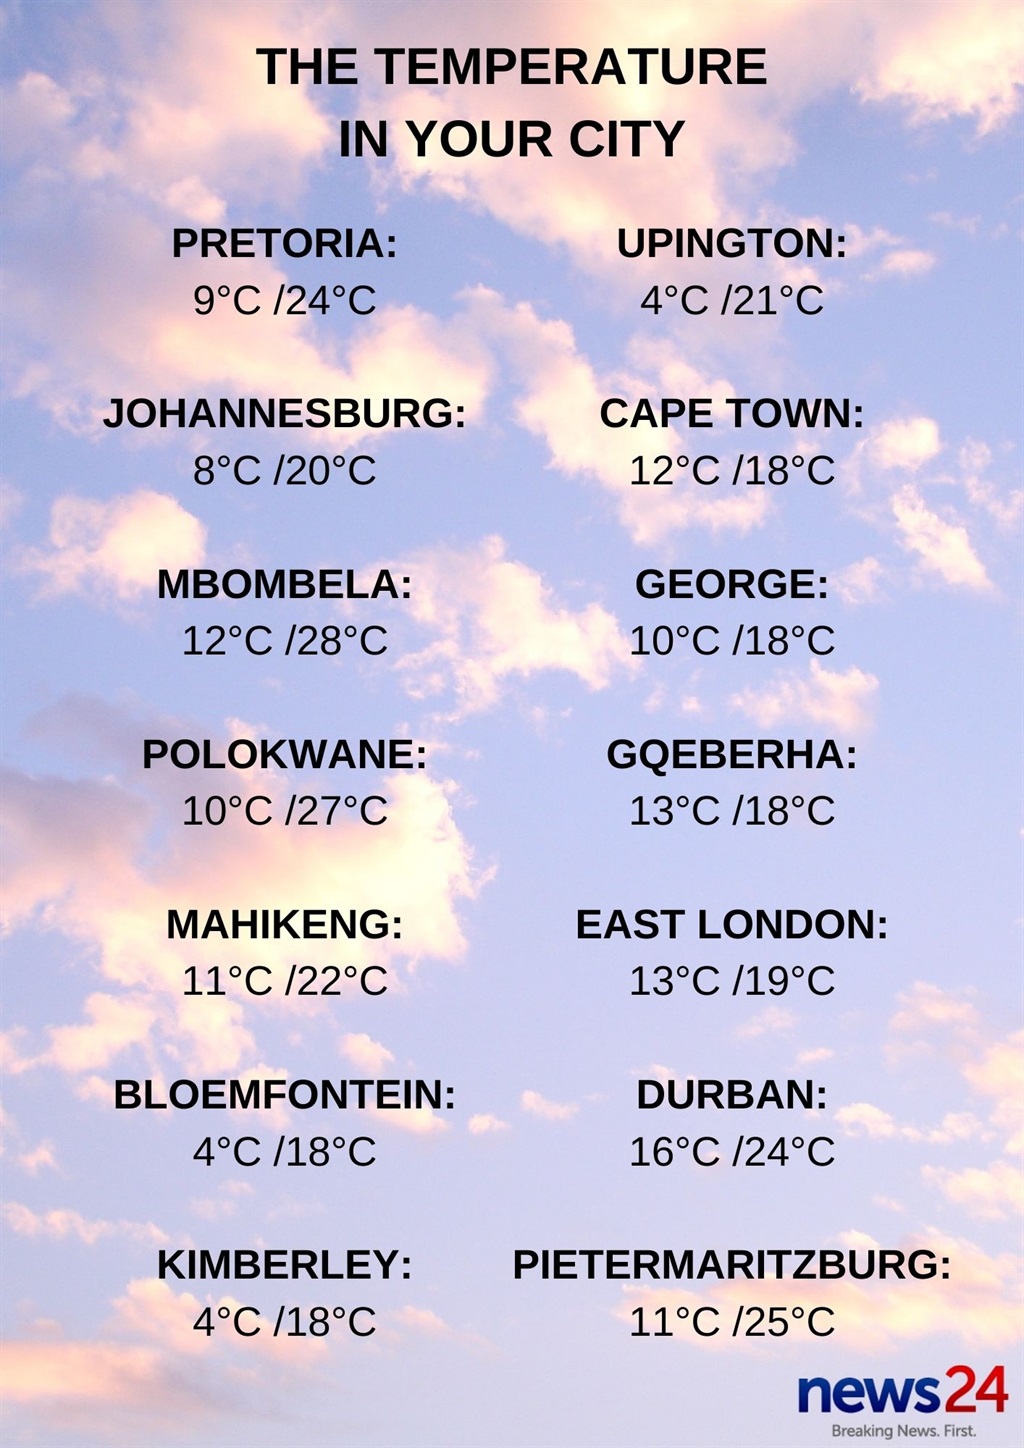 The temperature in your city.